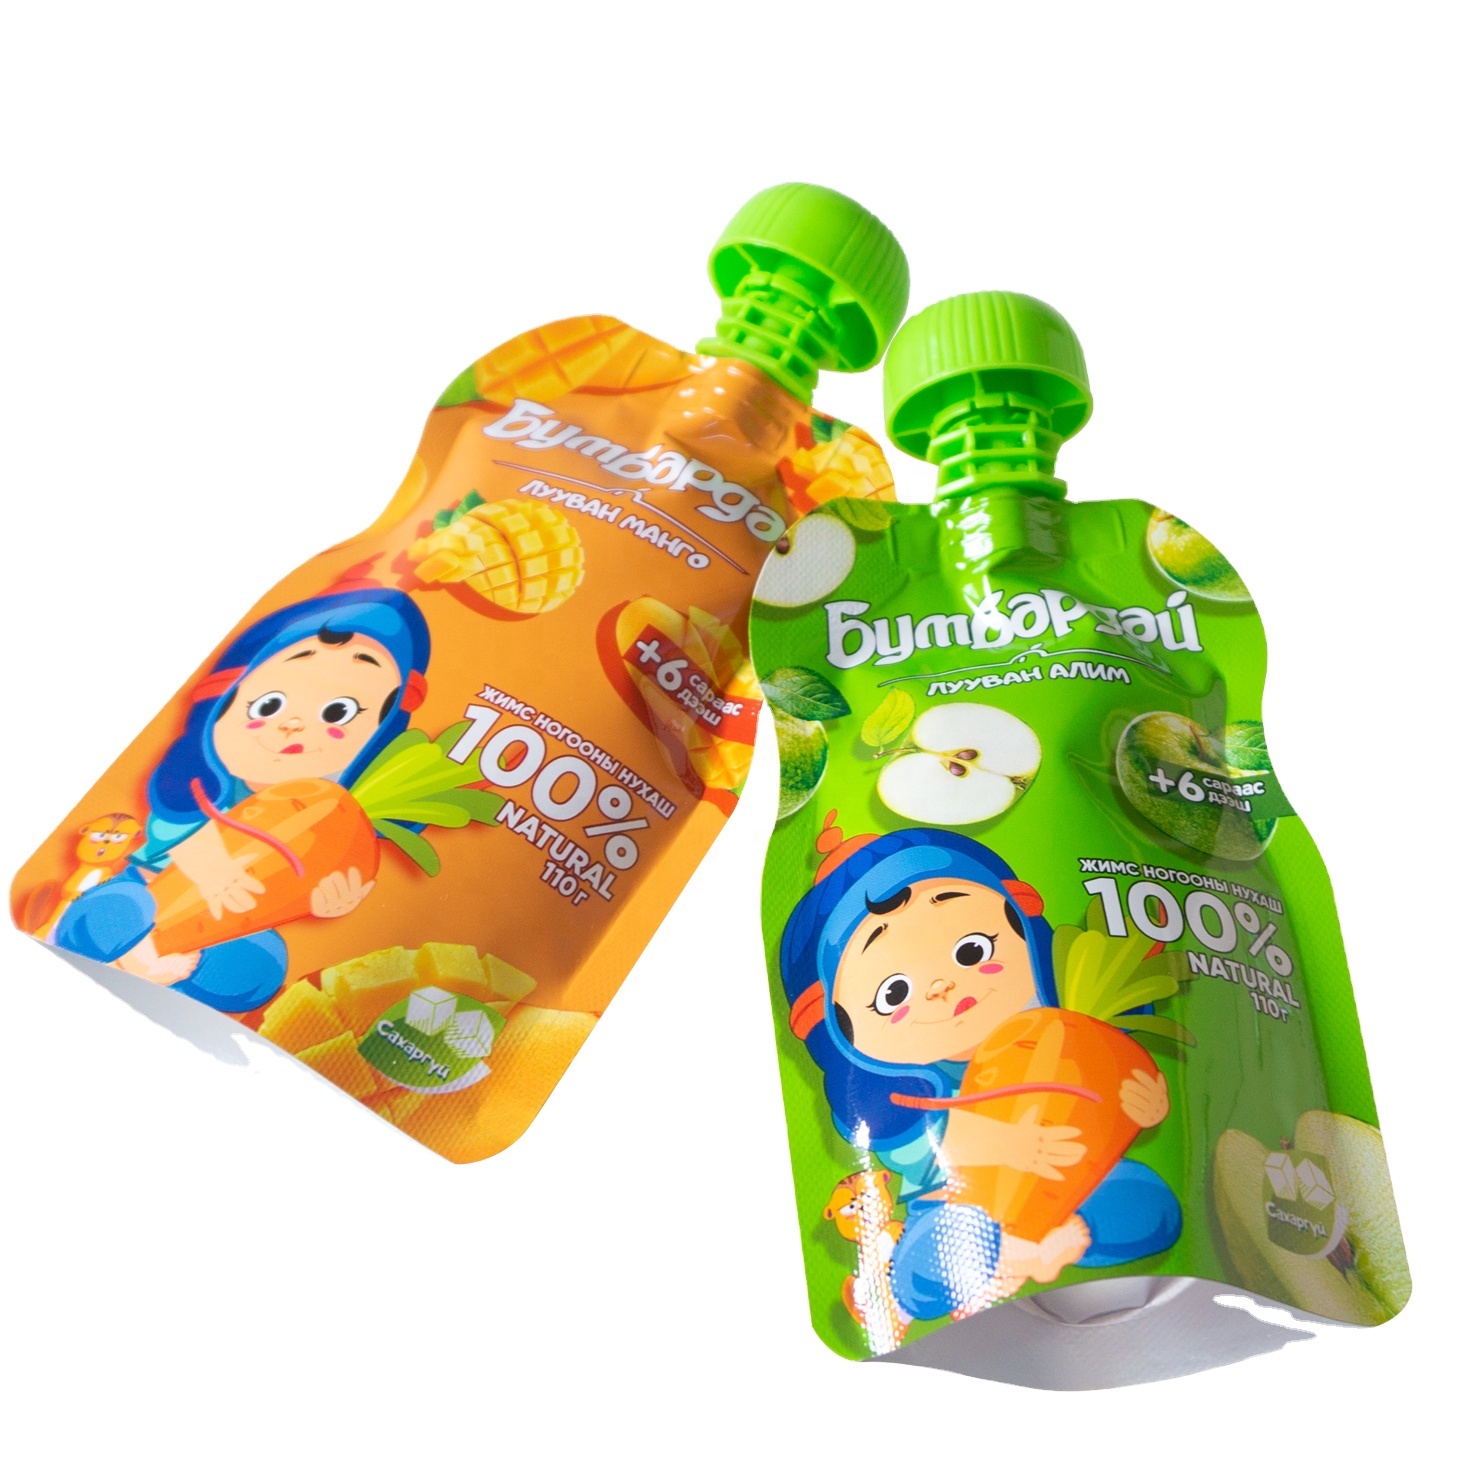 DQ PACK CHINA  Baby Complementary Food Spout Shaped Pouch With baby spout Packaging Drink Packaging